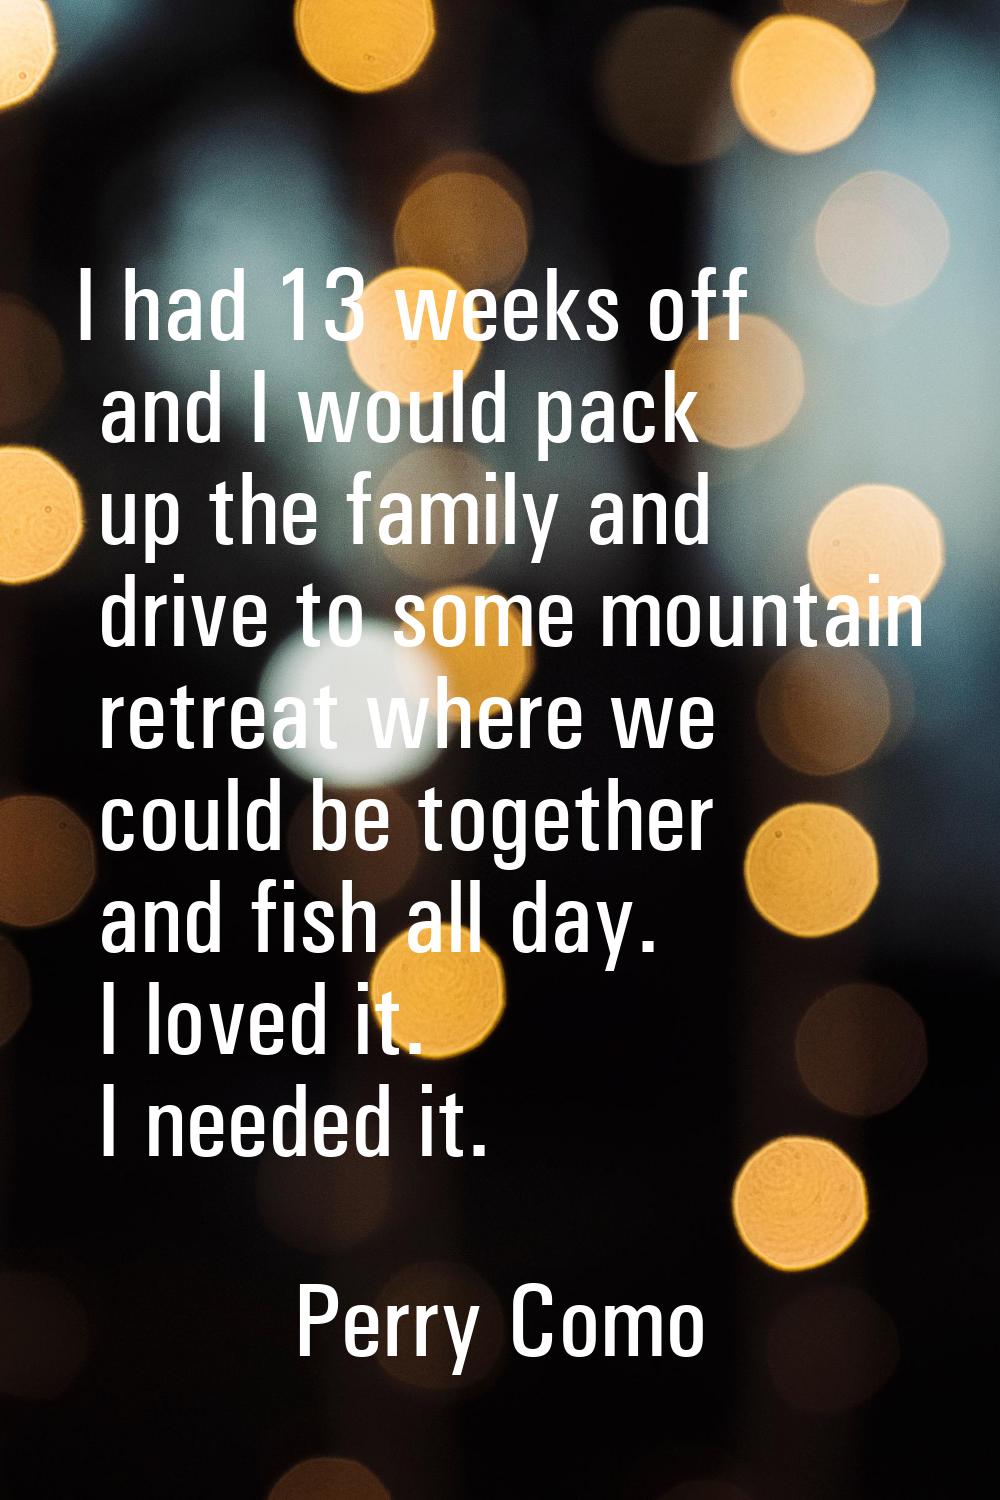 I had 13 weeks off and I would pack up the family and drive to some mountain retreat where we could